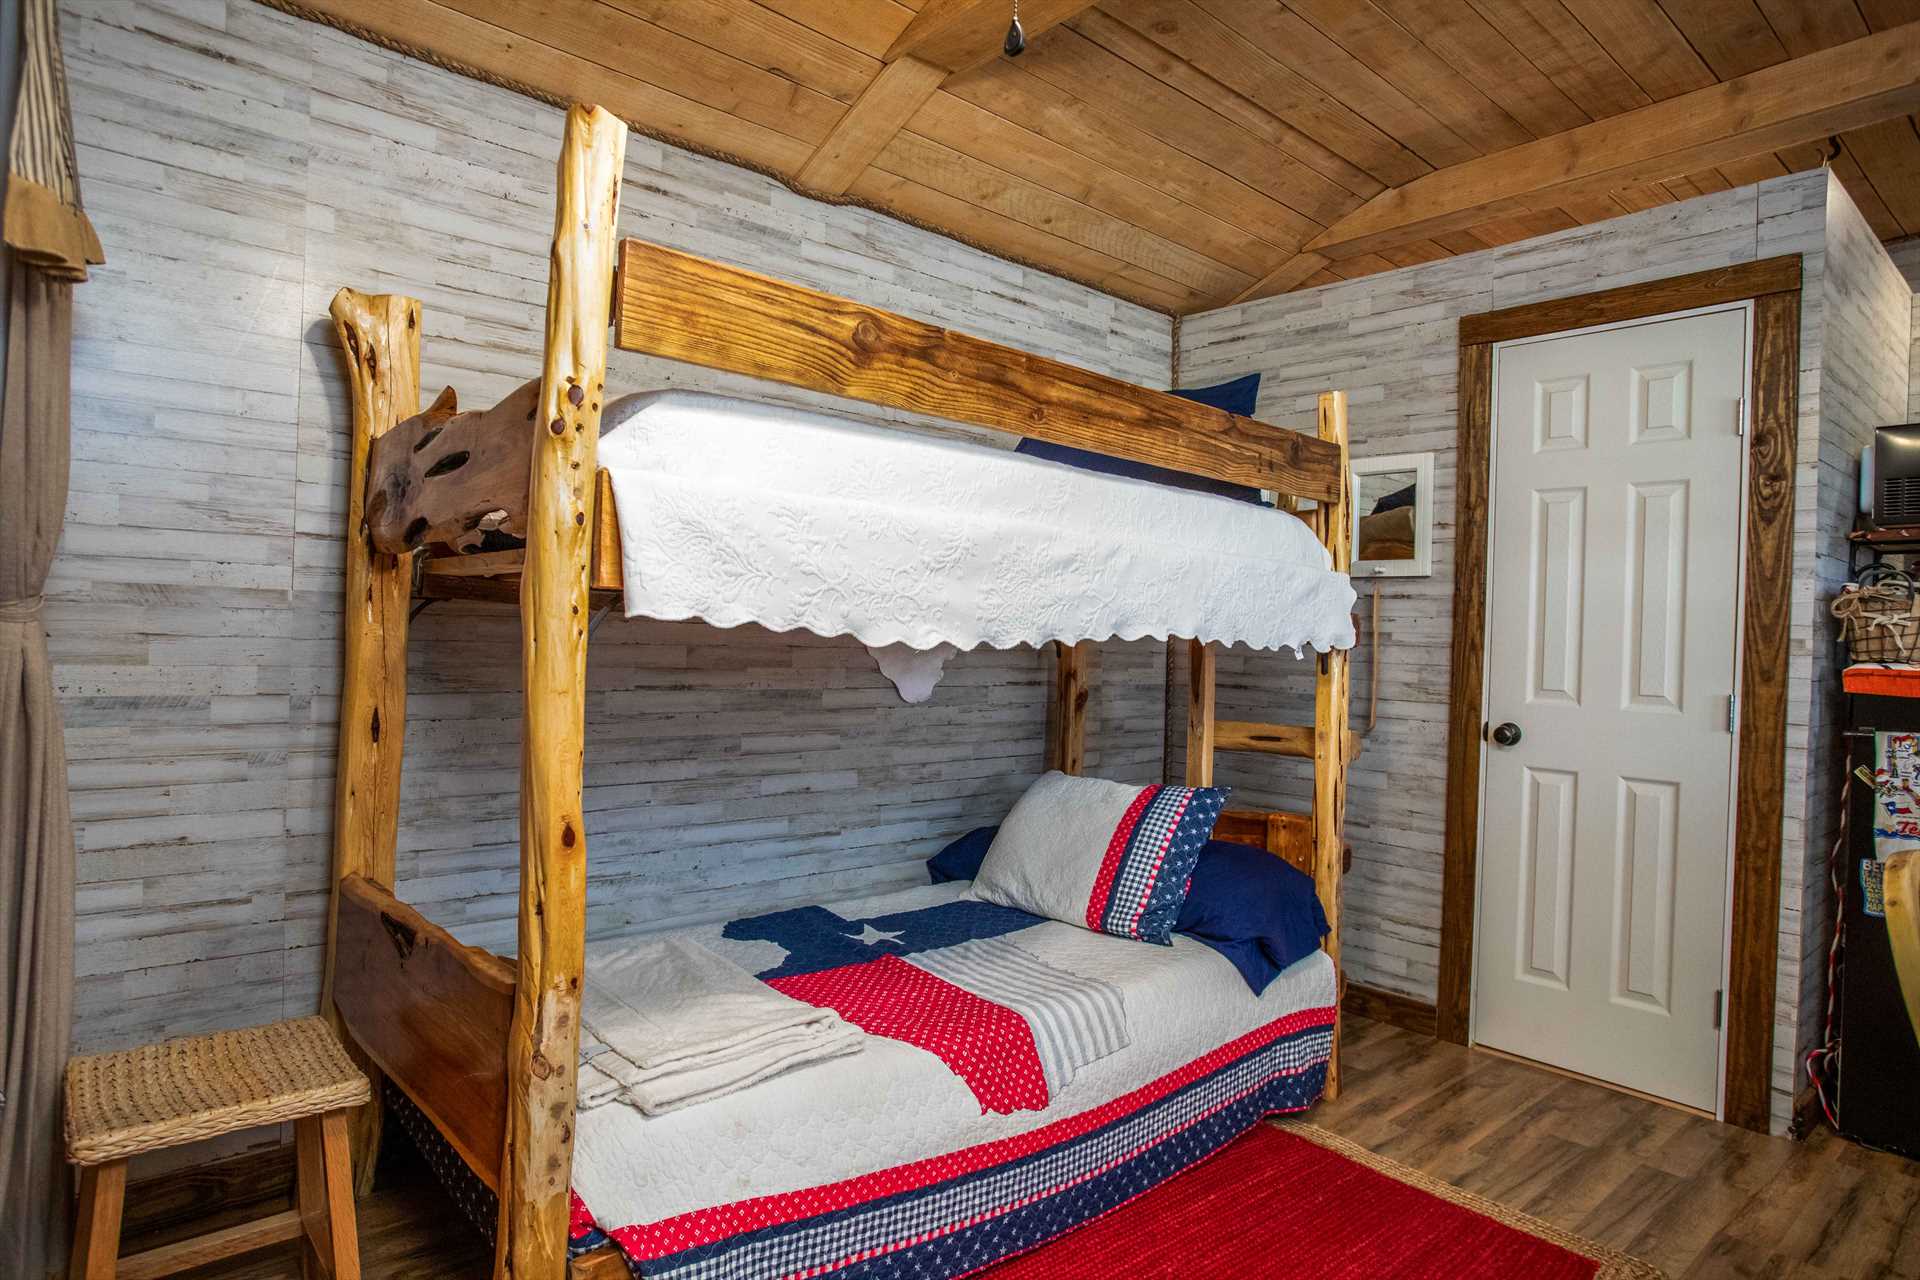                                                 Bringing kids along? They love the bunk bed setup in the Lone Star!